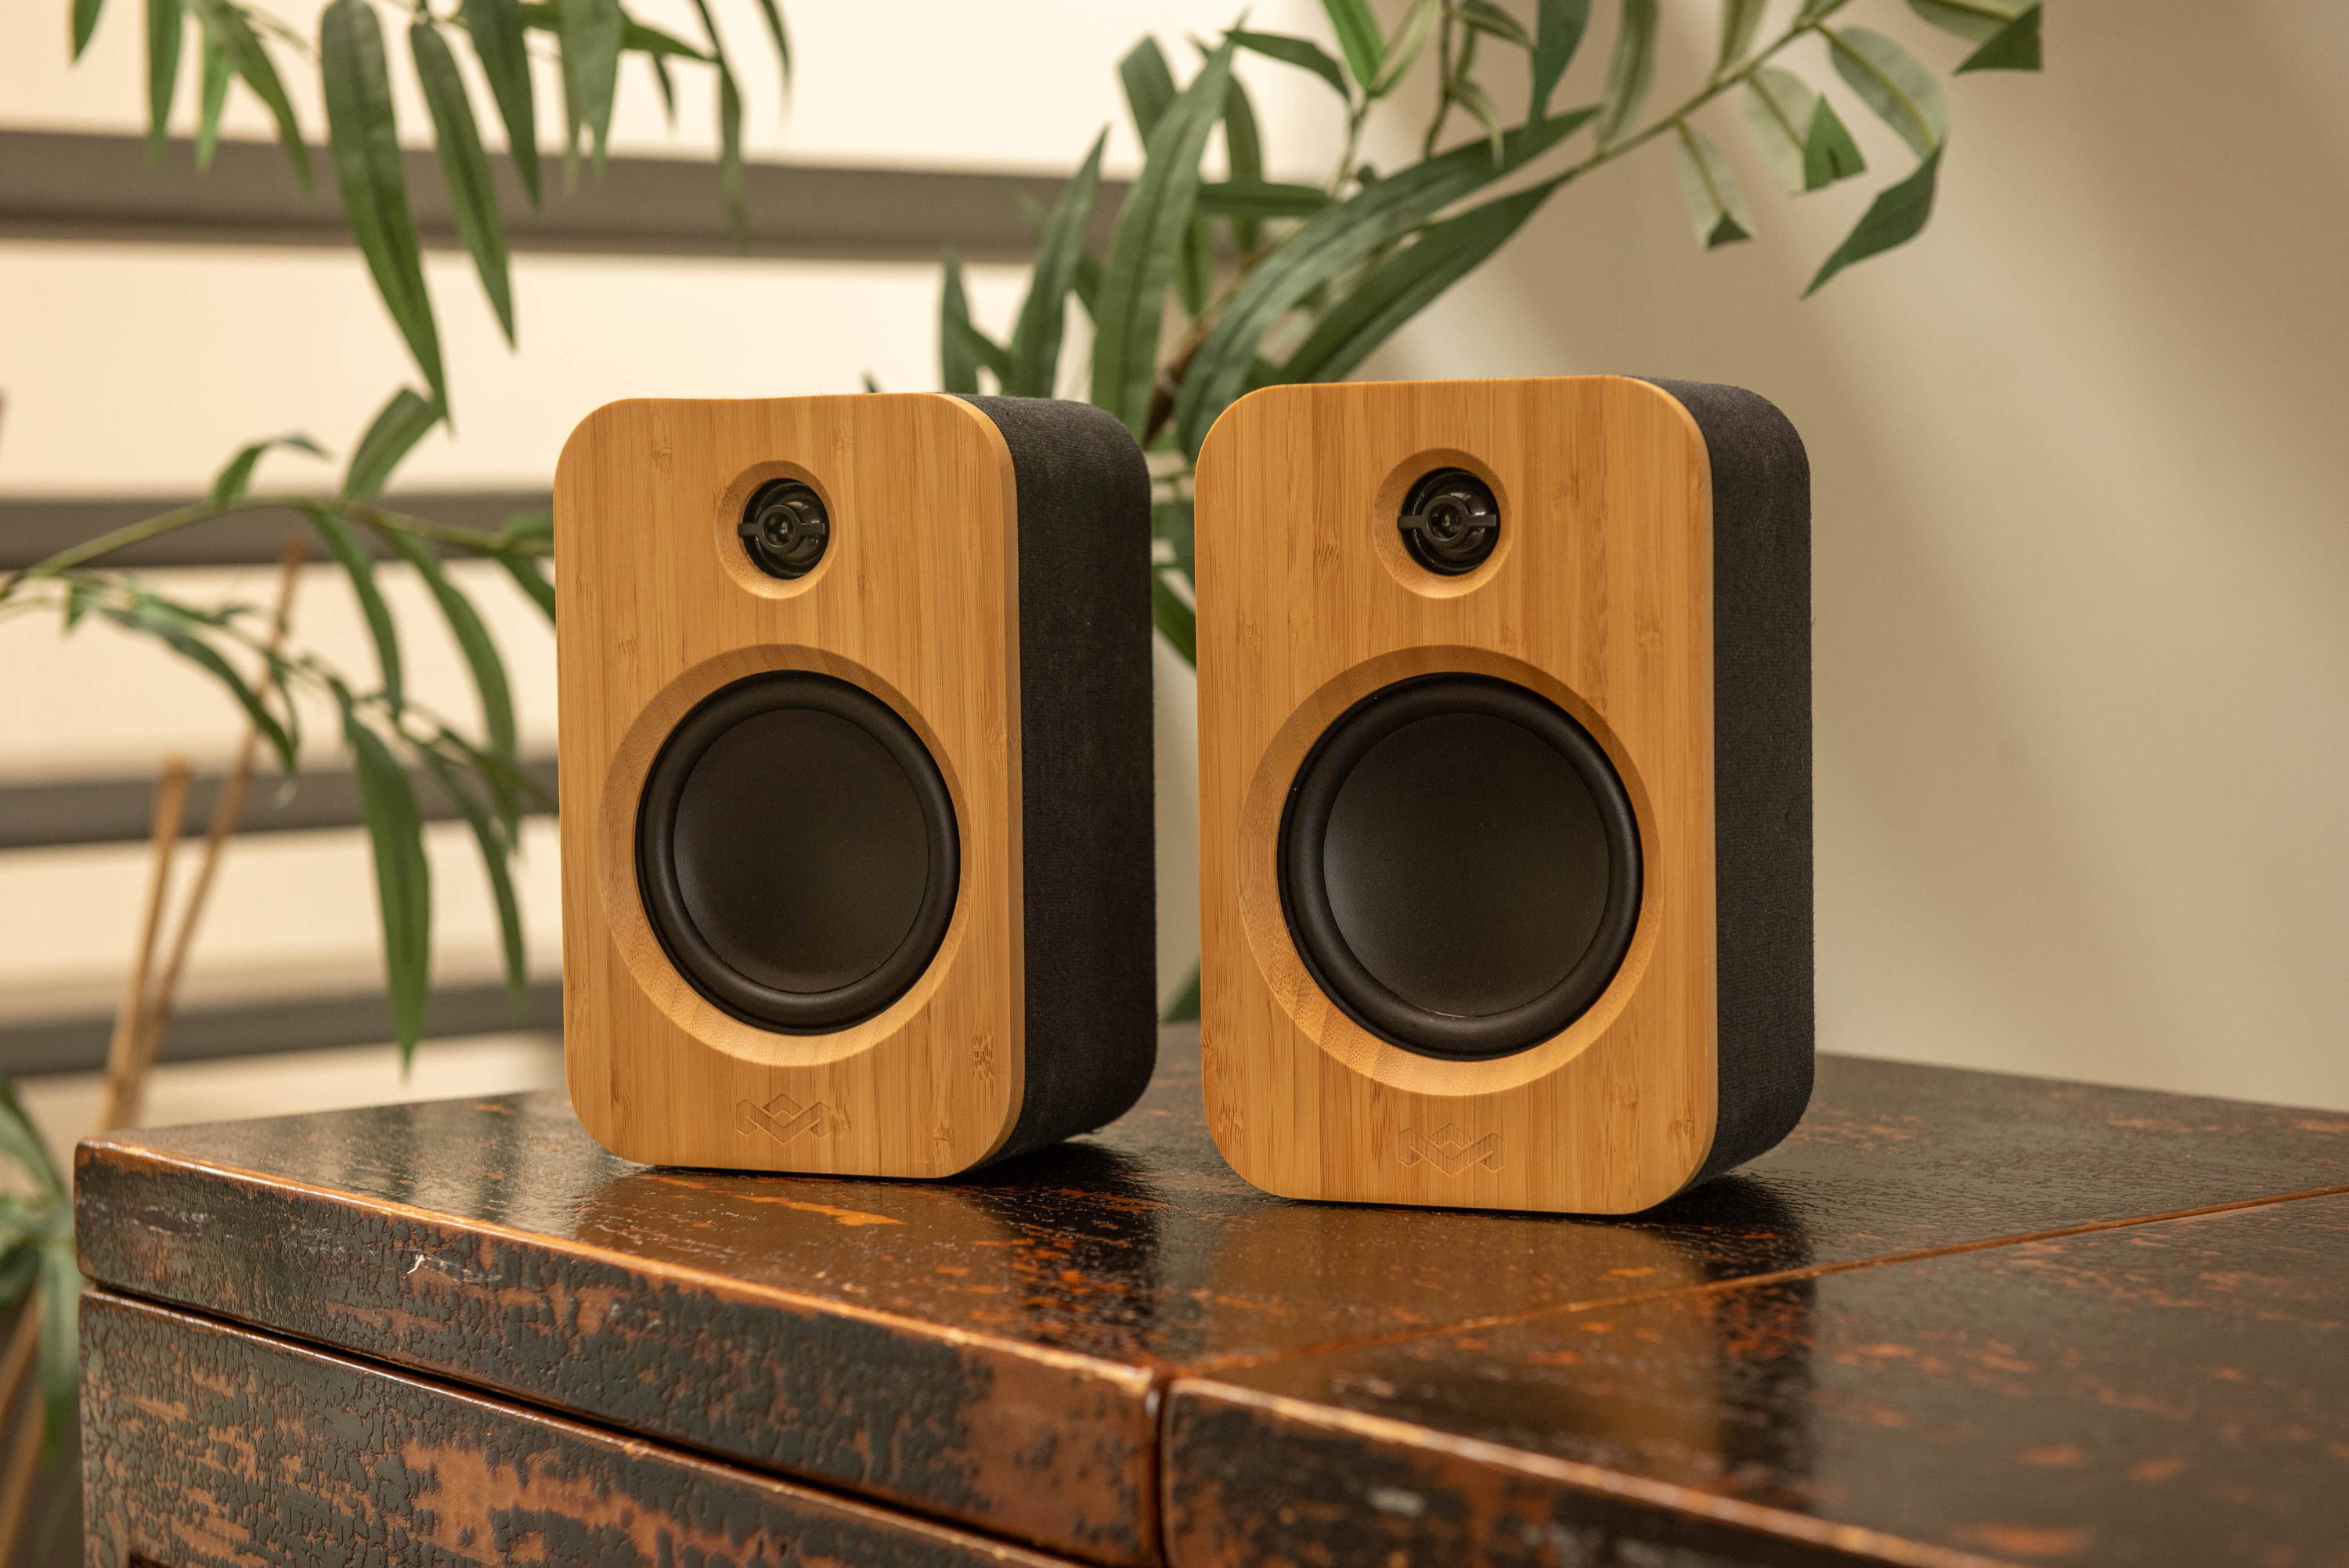 House of Marley Bluetooth portable speakers